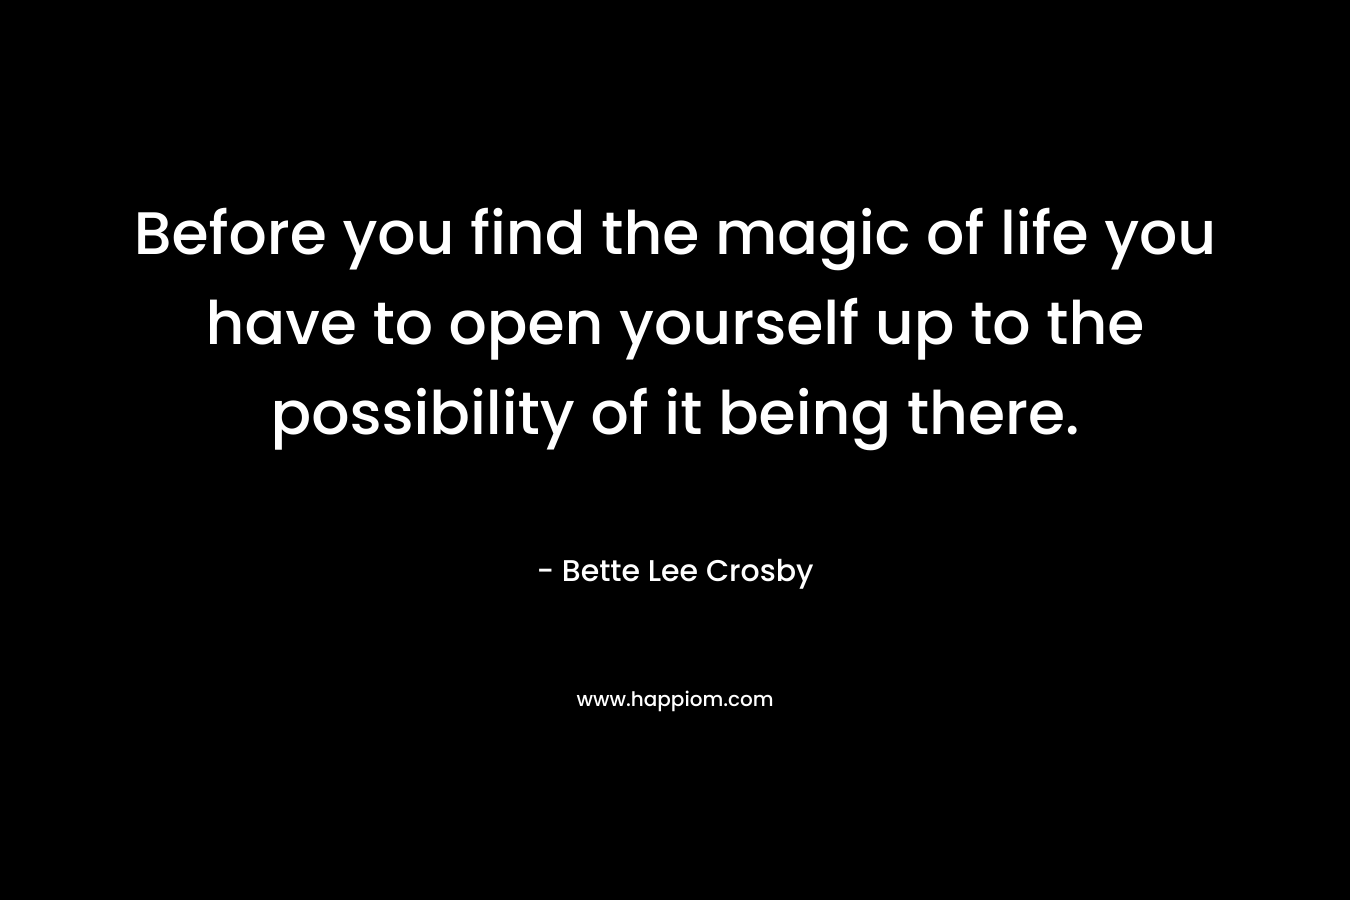 Before you find the magic of life you have to open yourself up to the possibility of it being there.